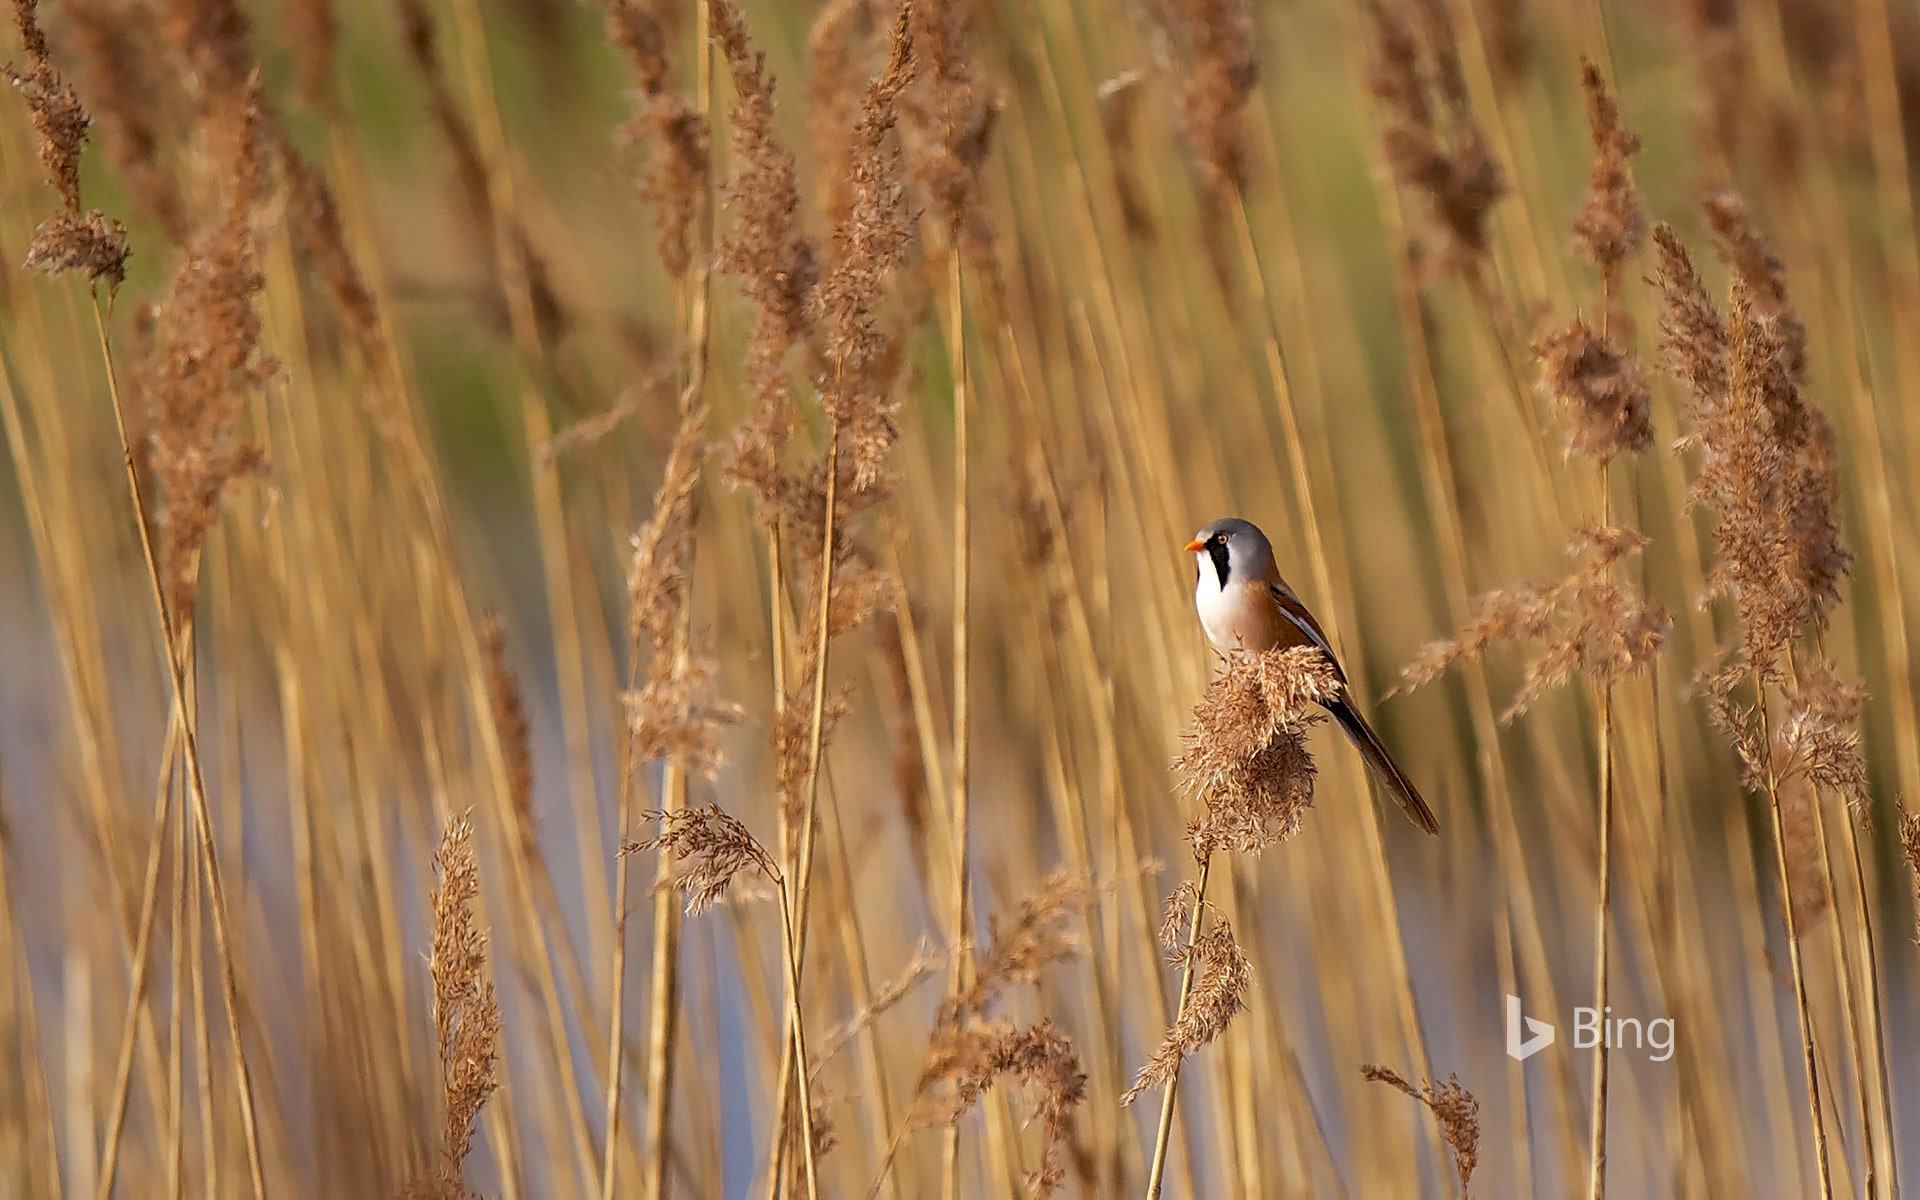 A bearded reedling in Elmley National Nature Reserve in Kent, England